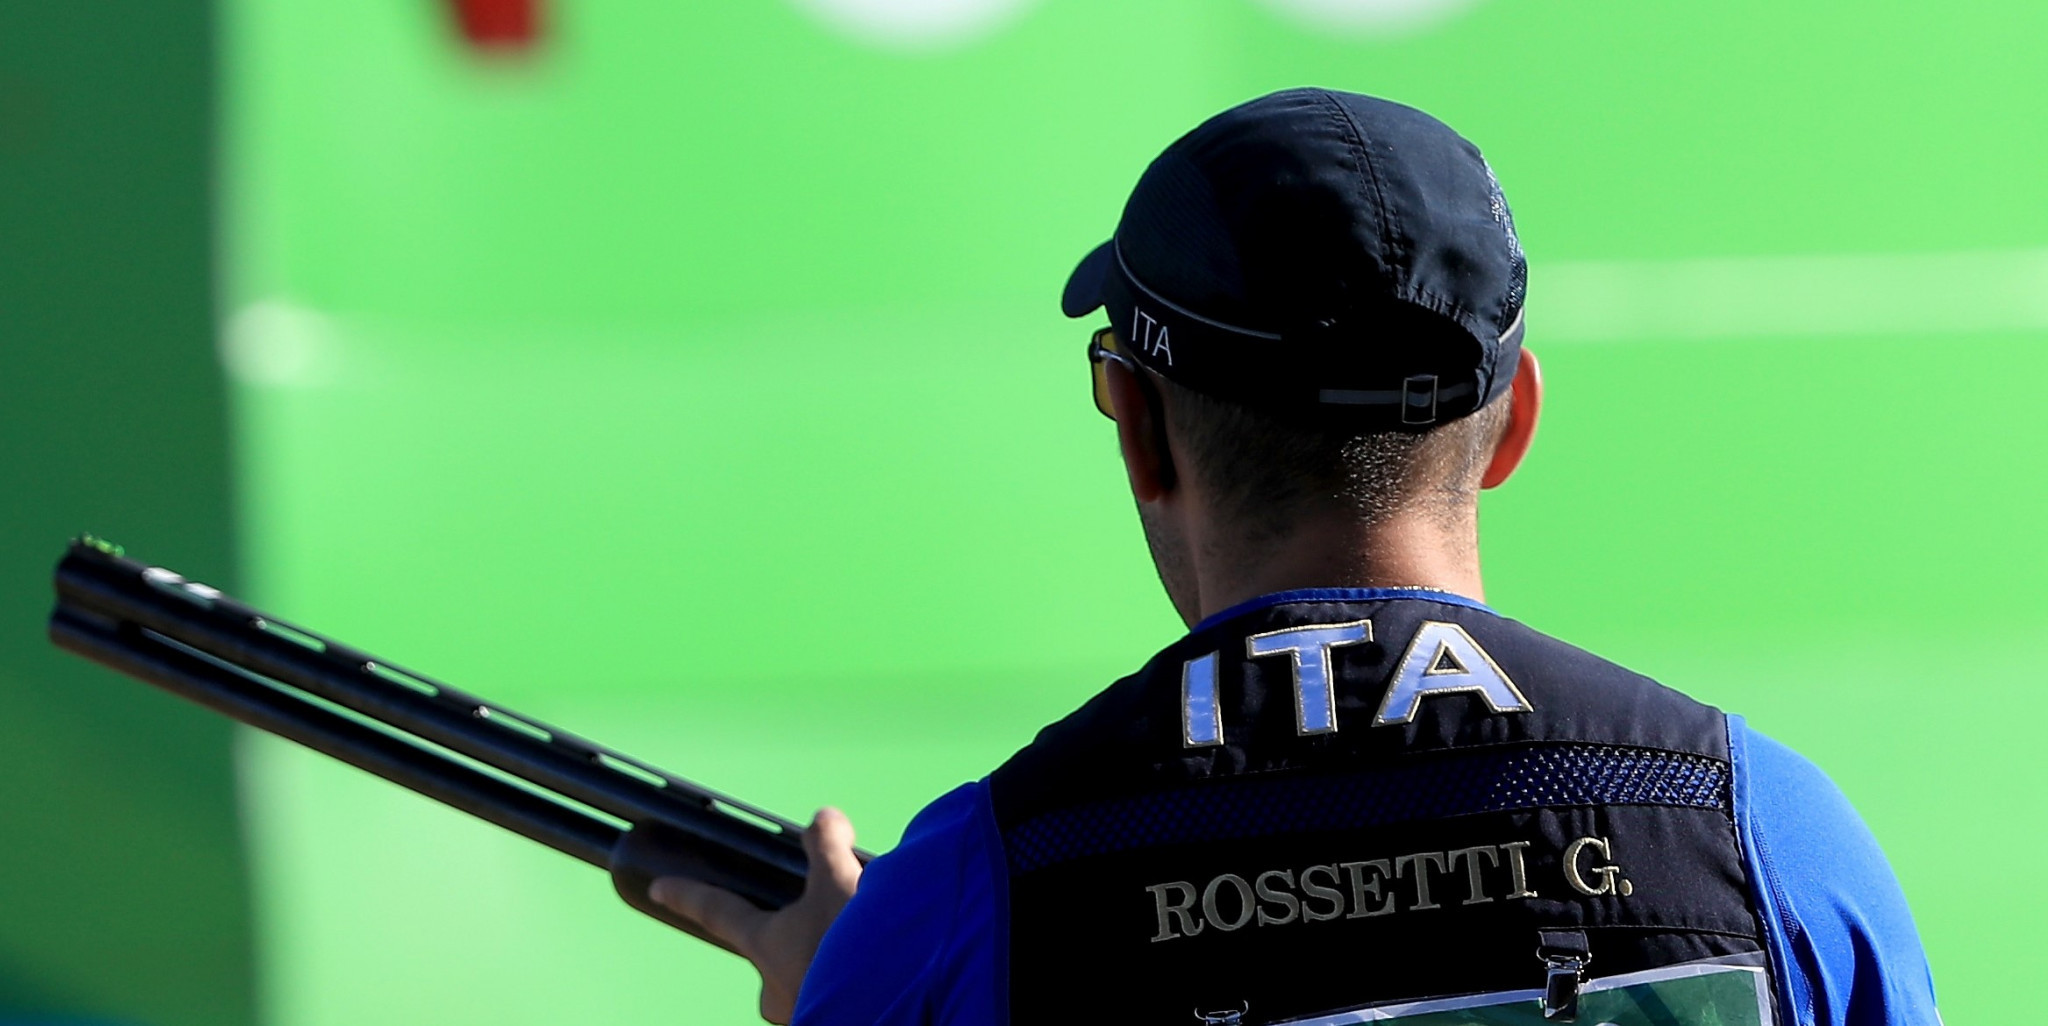 Reigning Olympic champion Gabriele Rossetti made a string start in Lonato ©Getty Images